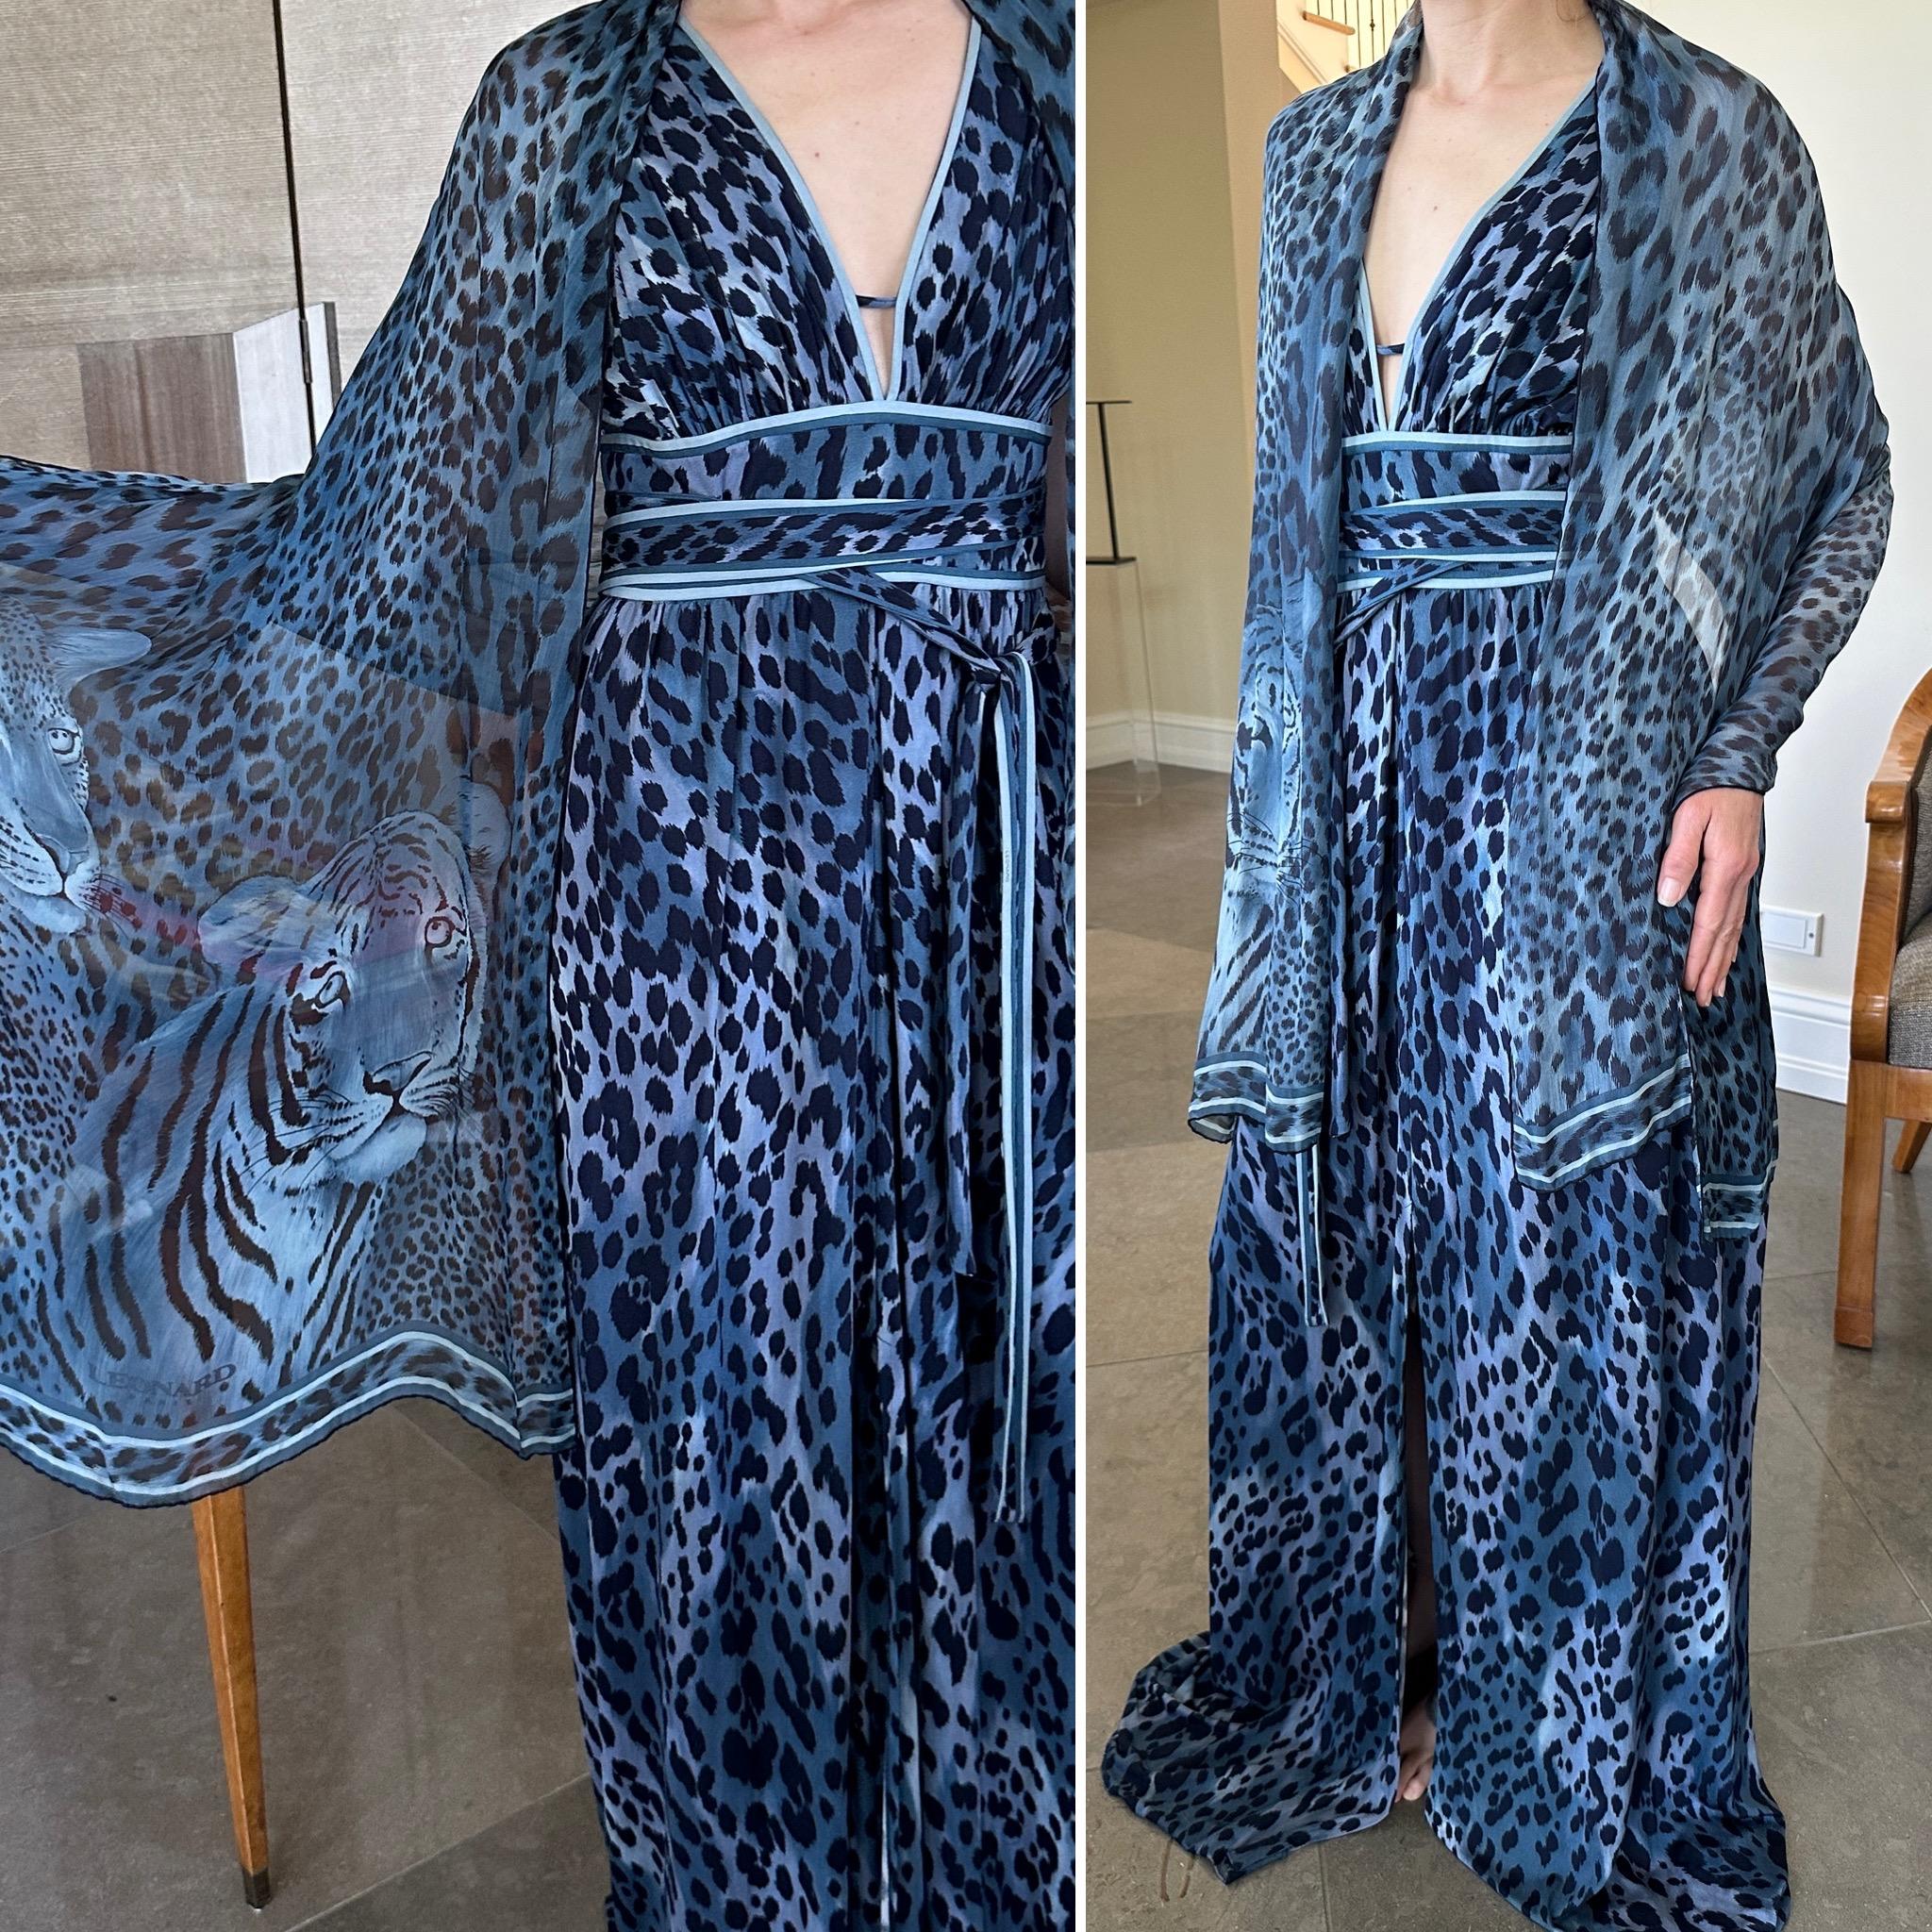 Leonard Paris Vintage Silk Leopard Print Evening Dress with Matching Shawl in Hard to Find sz 48
So pretty, please use the zoom lens to see details. 
Leonard Paris was a contemporary of Pucci, both houses creating brilliant 60's patterns on silk